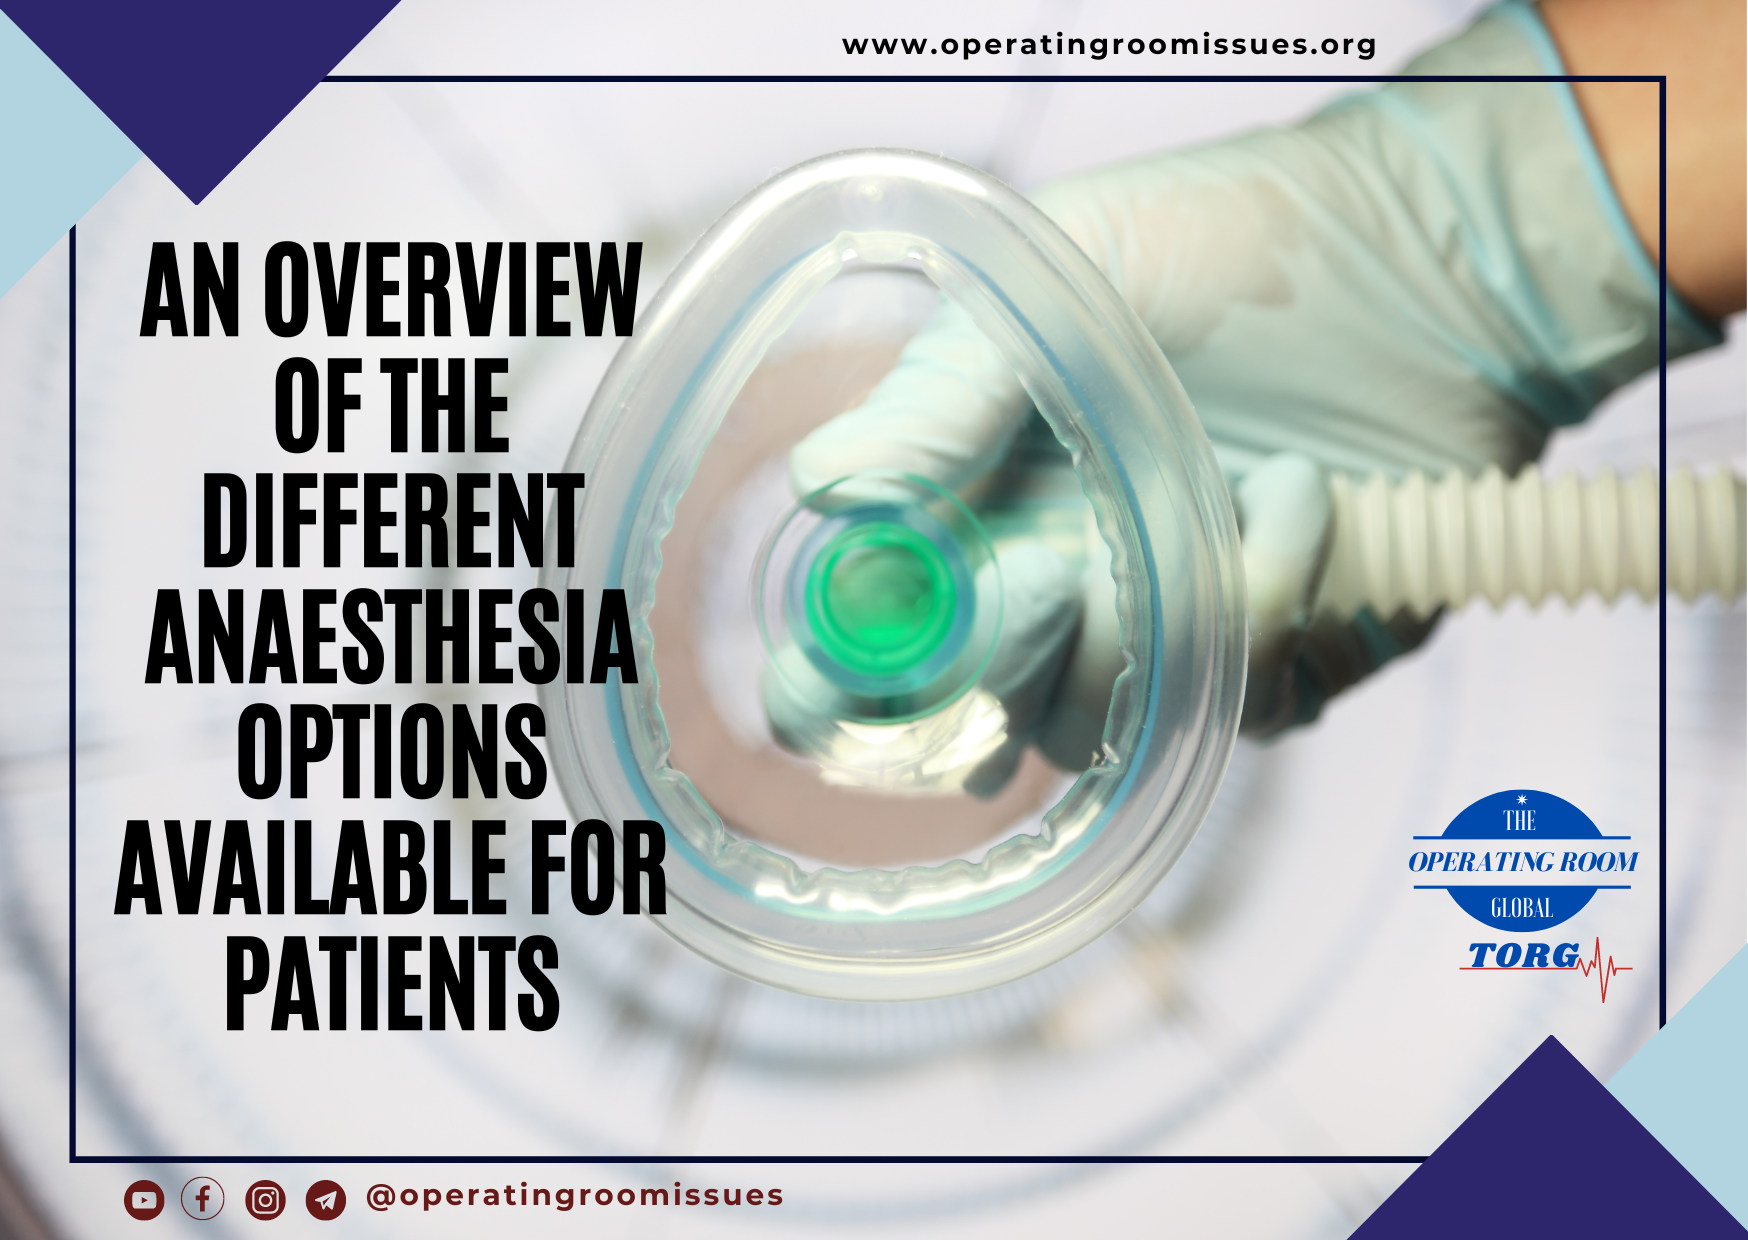 An overview of the different anaesthesia options available for patients